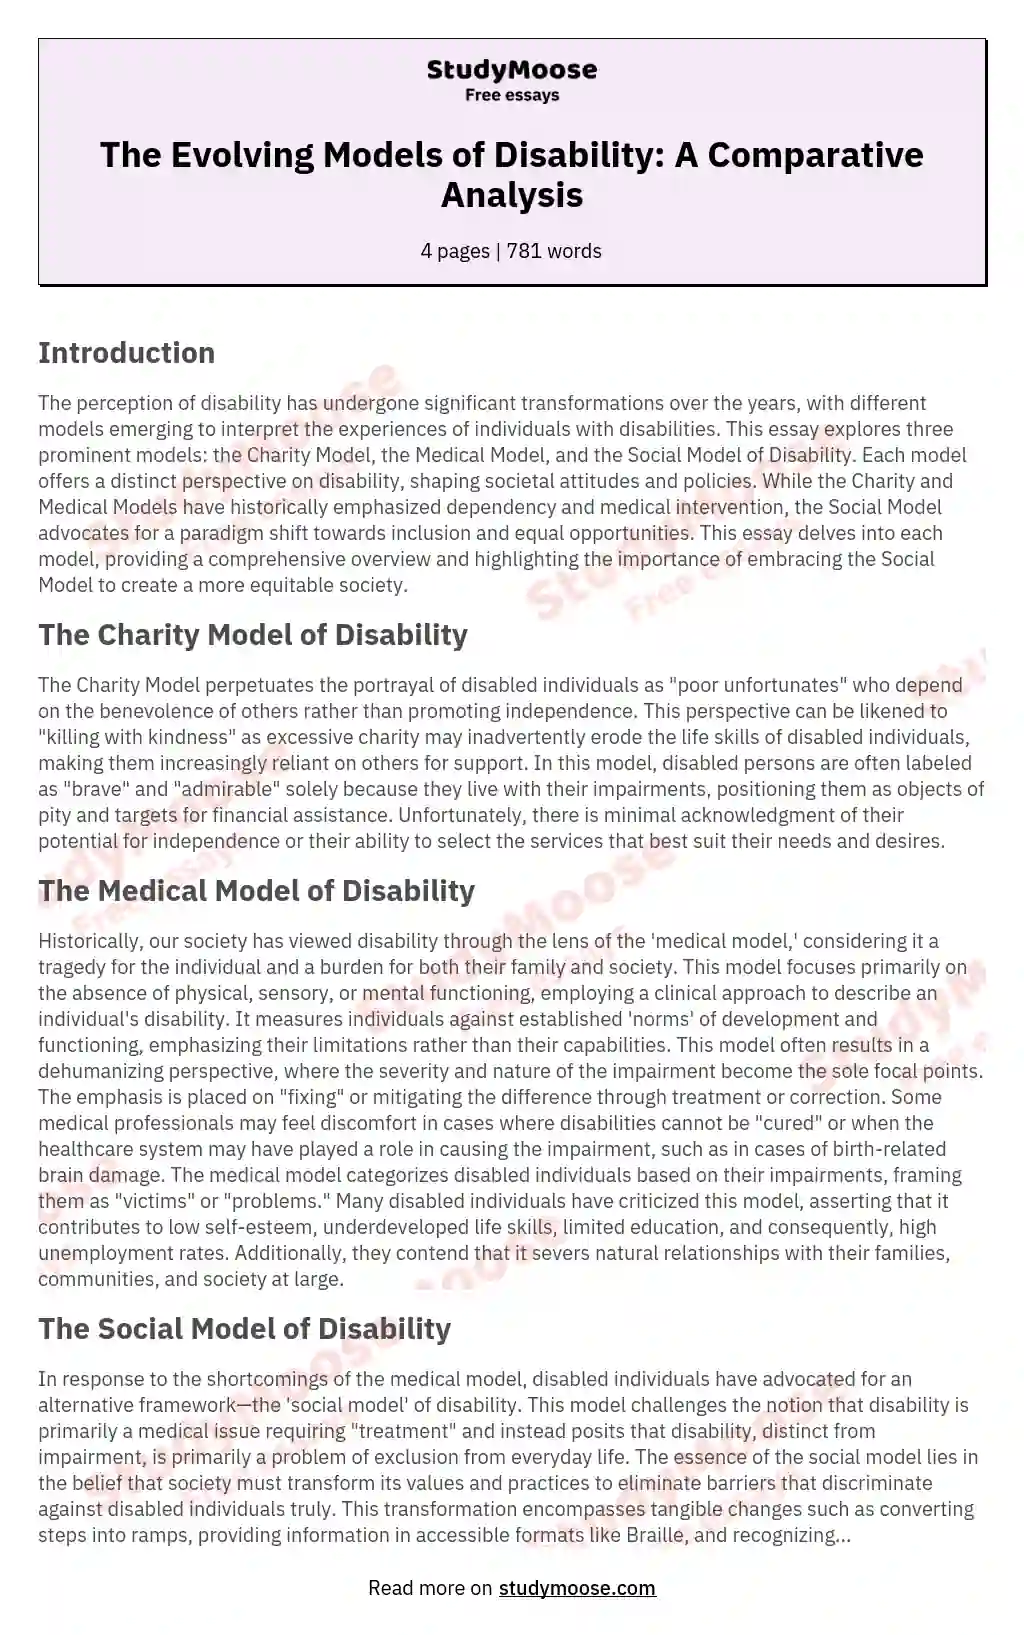 The Evolving Models of Disability: A Comparative Analysis essay